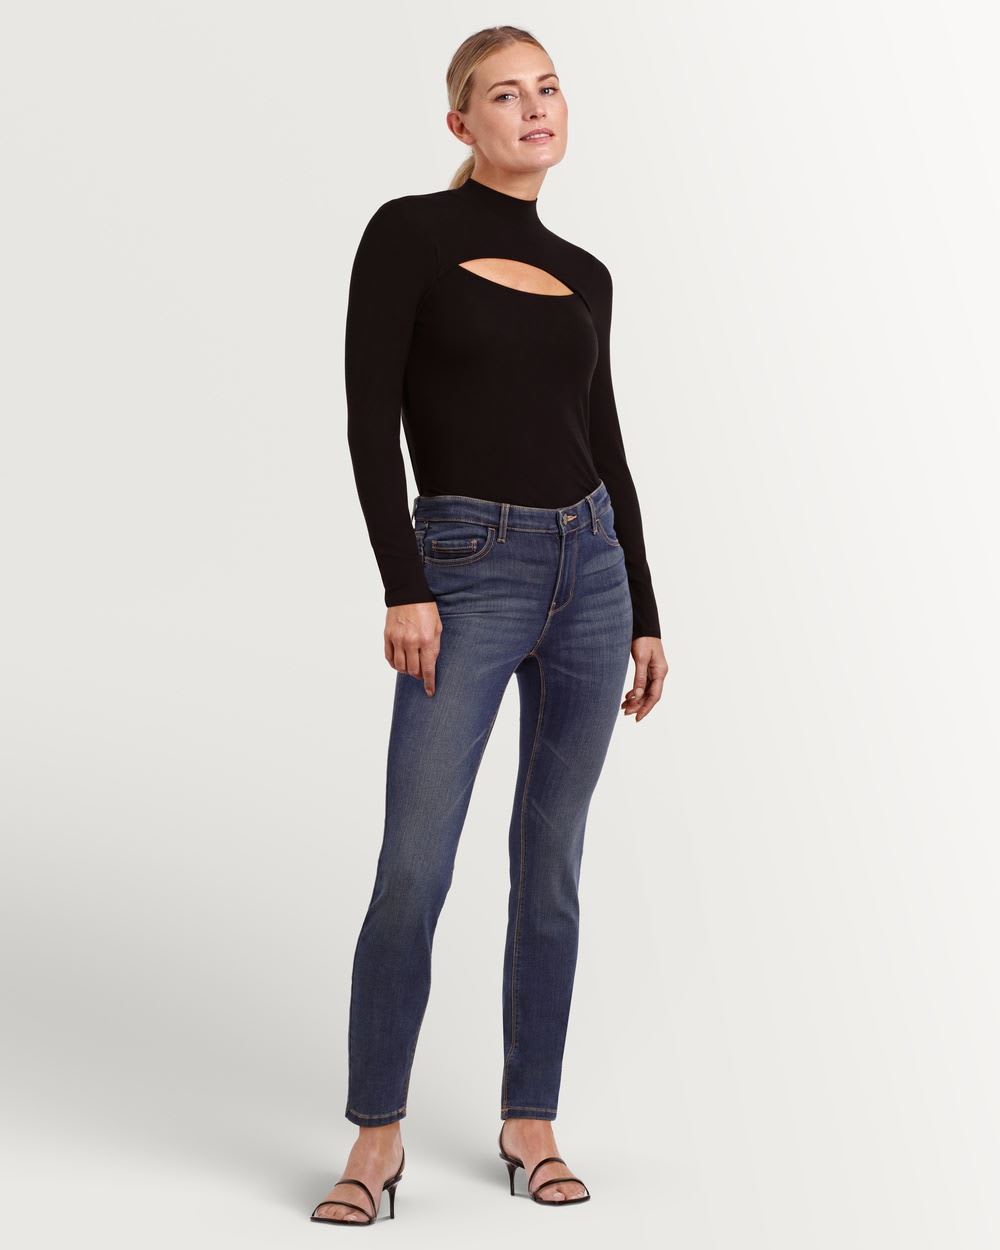 Rib Knit Mock Neck Pullover with Cut Out Accent